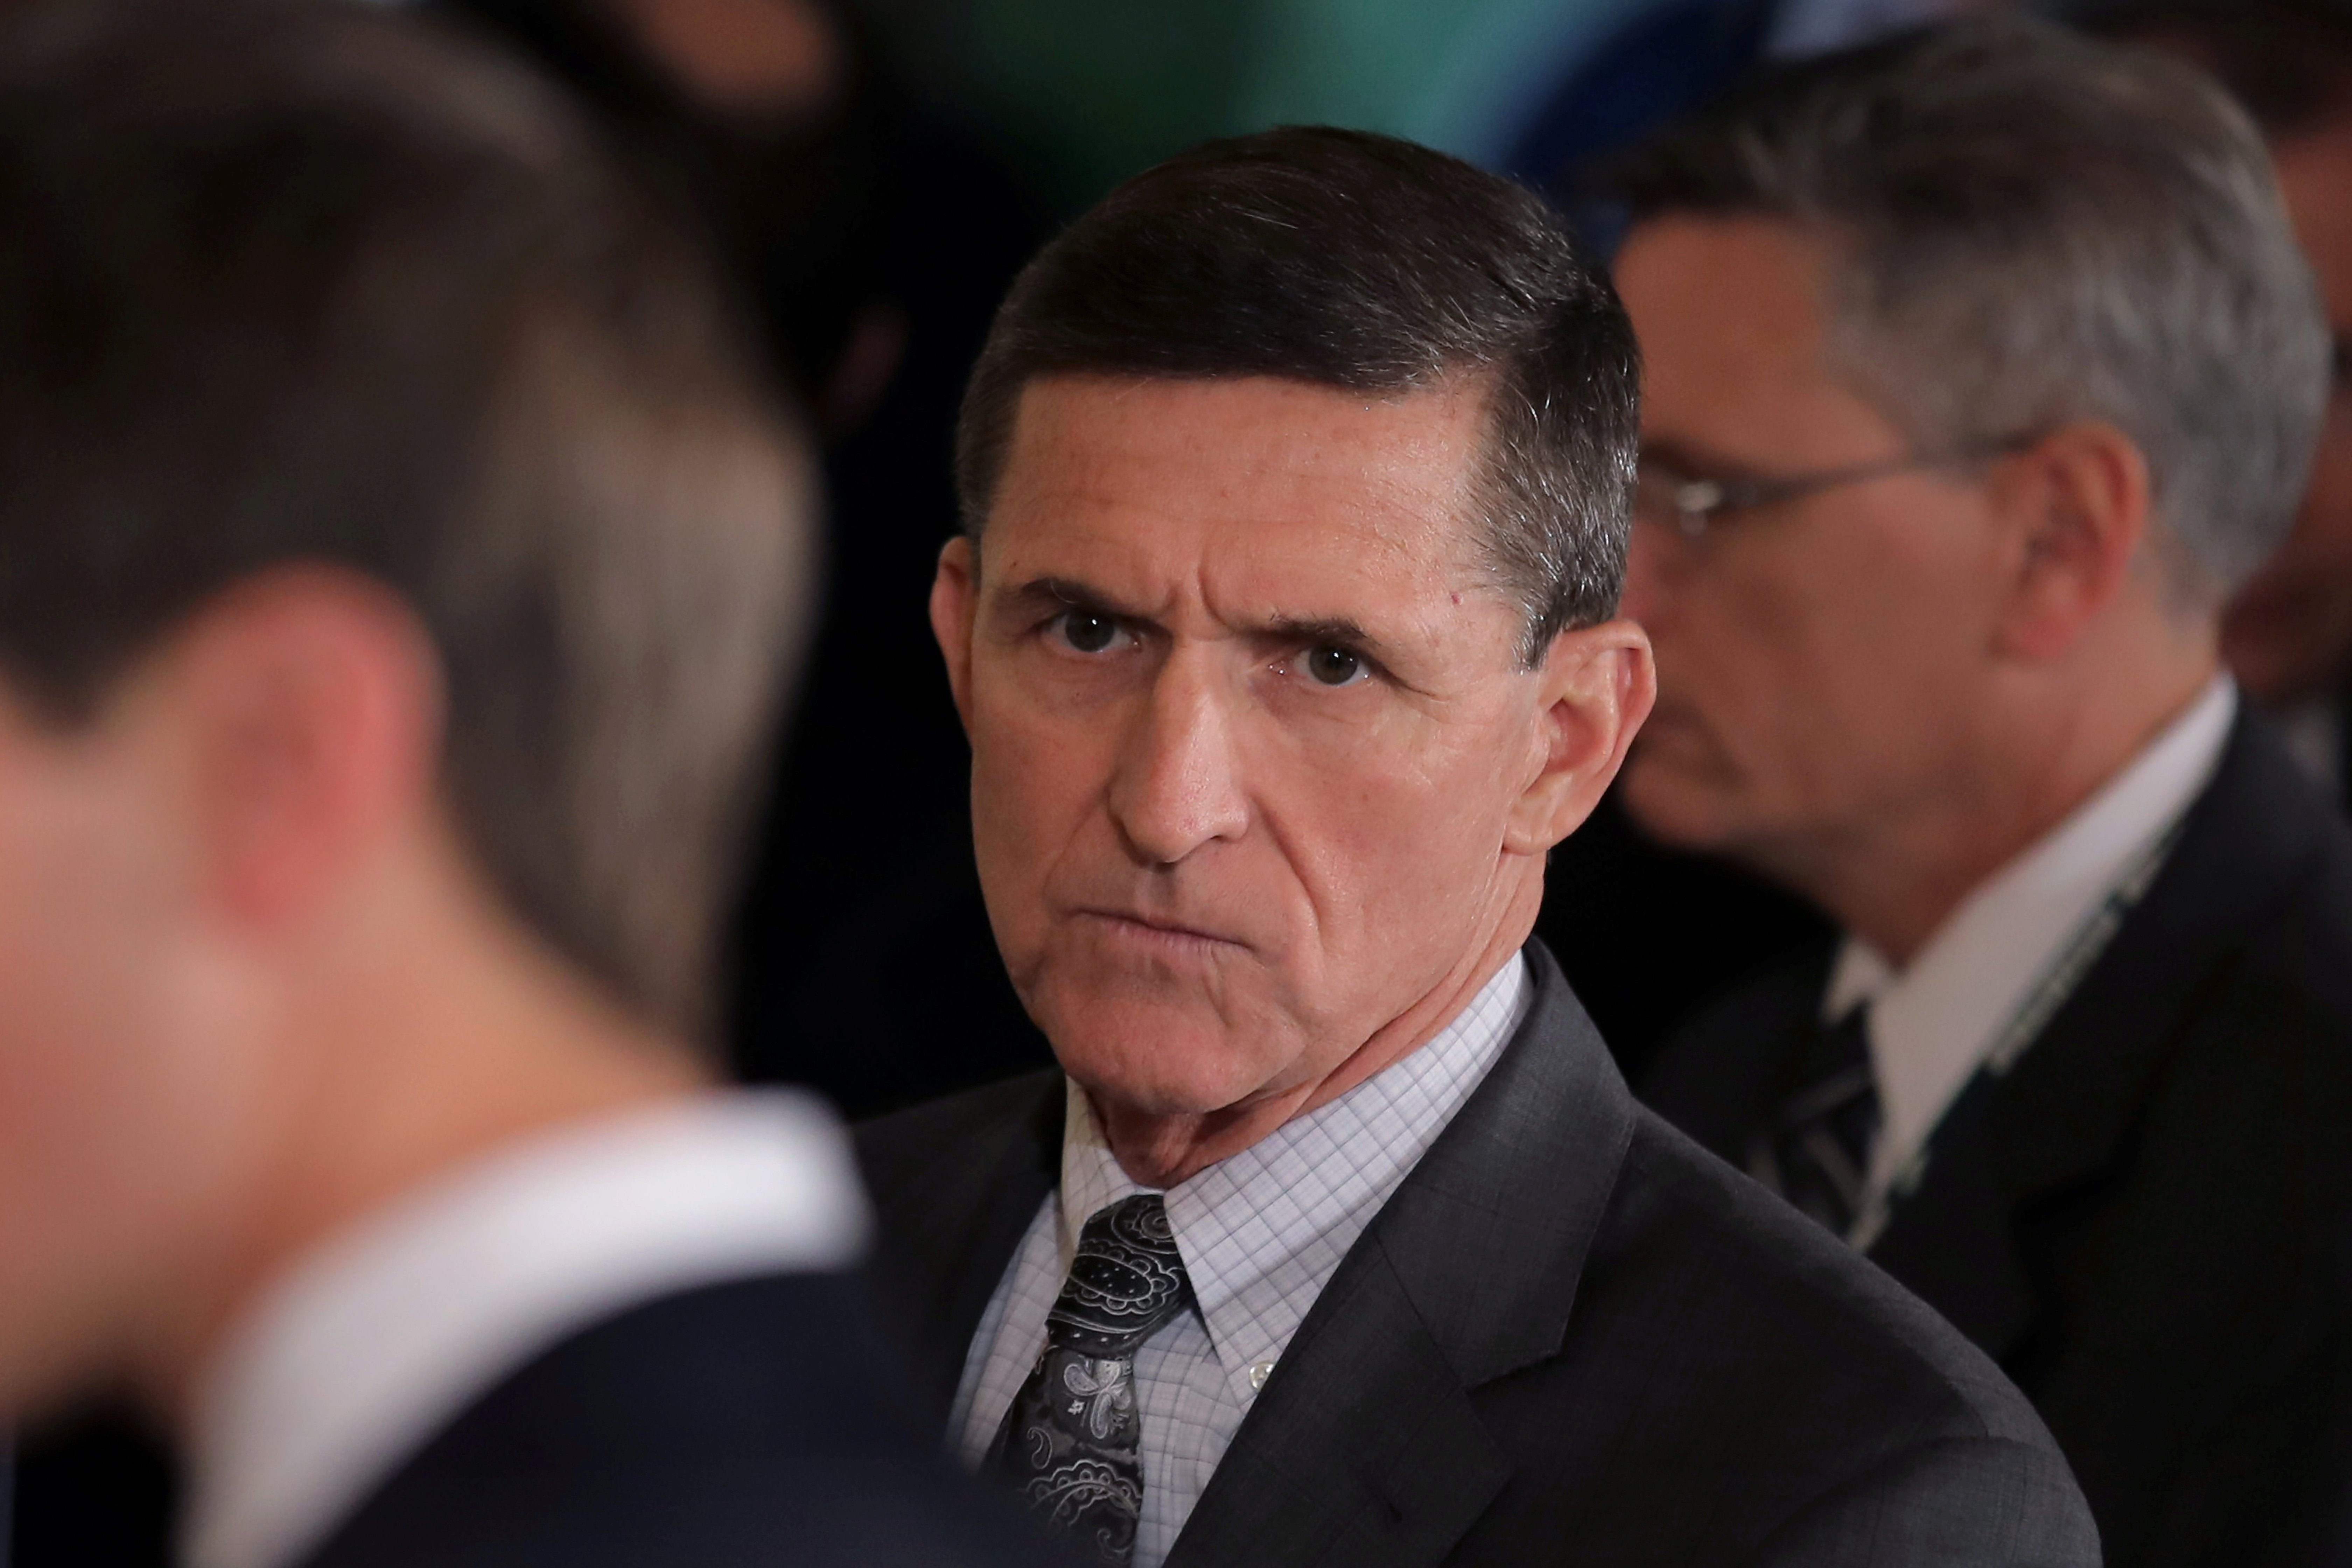 Michael Flynn Is in Talks to Testify Before Congress in Exchange for Immunity
